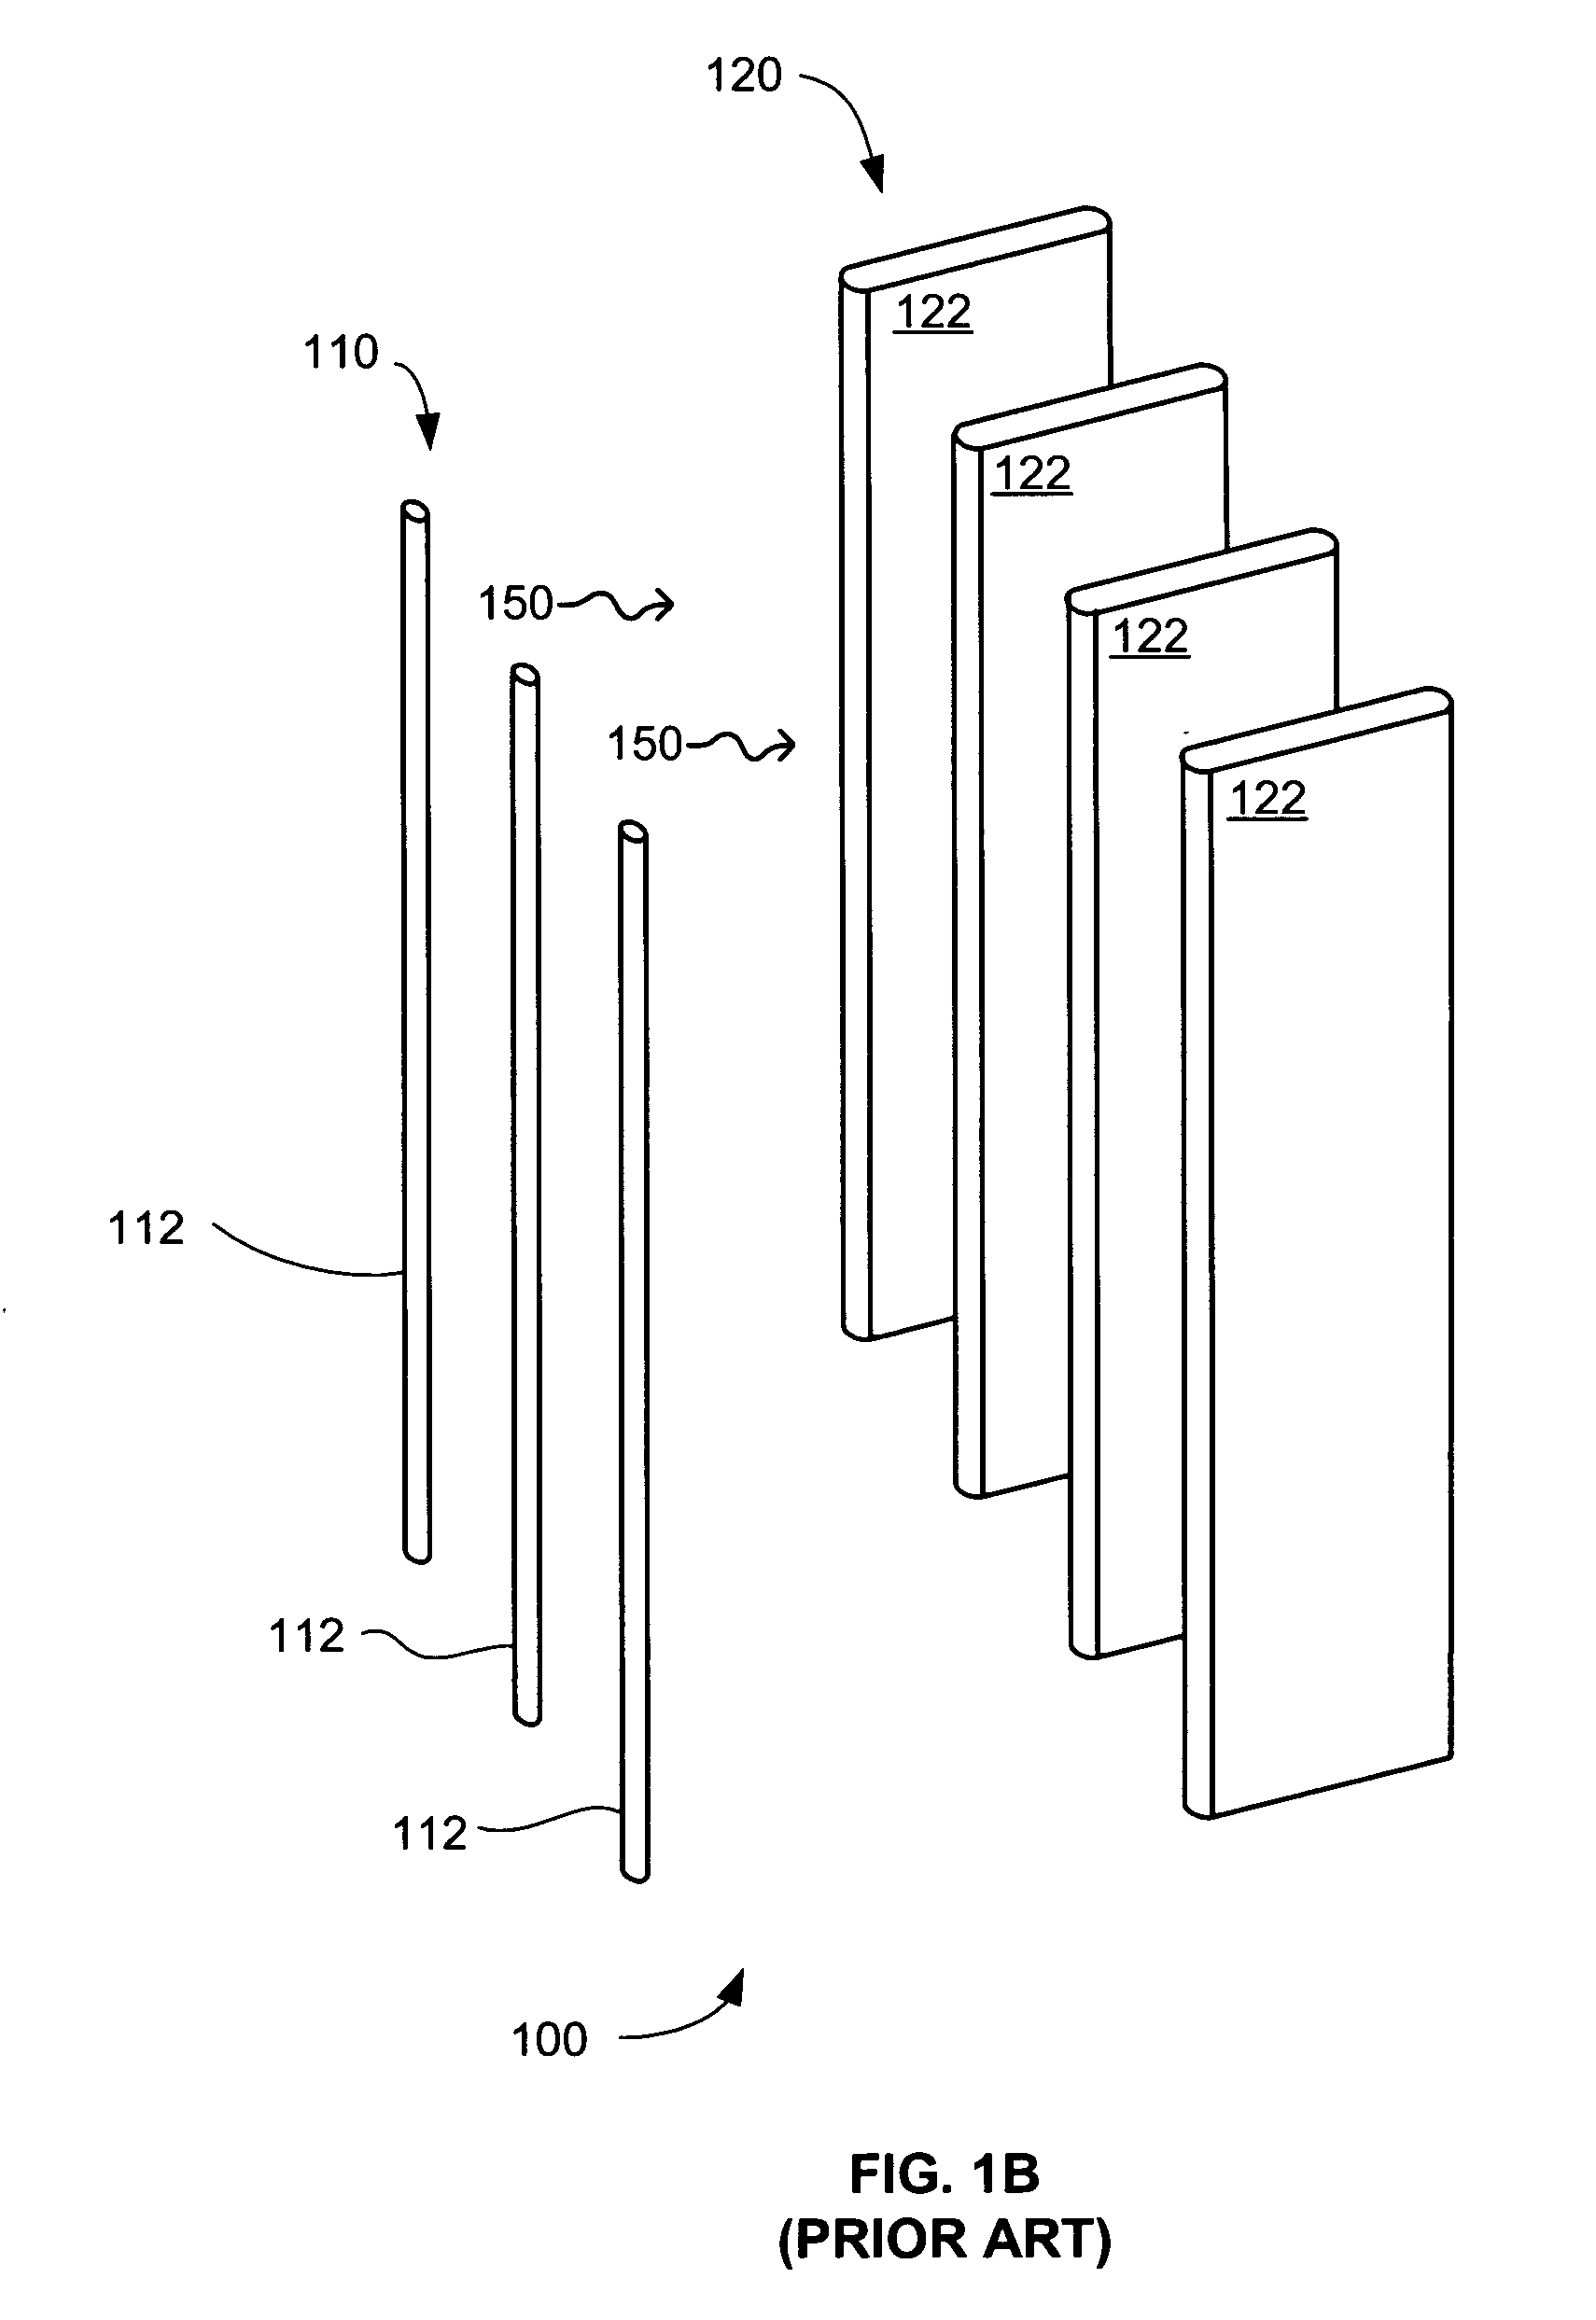 Electro-kinetic air transporter and conditioner devices with a mesh collector electrode